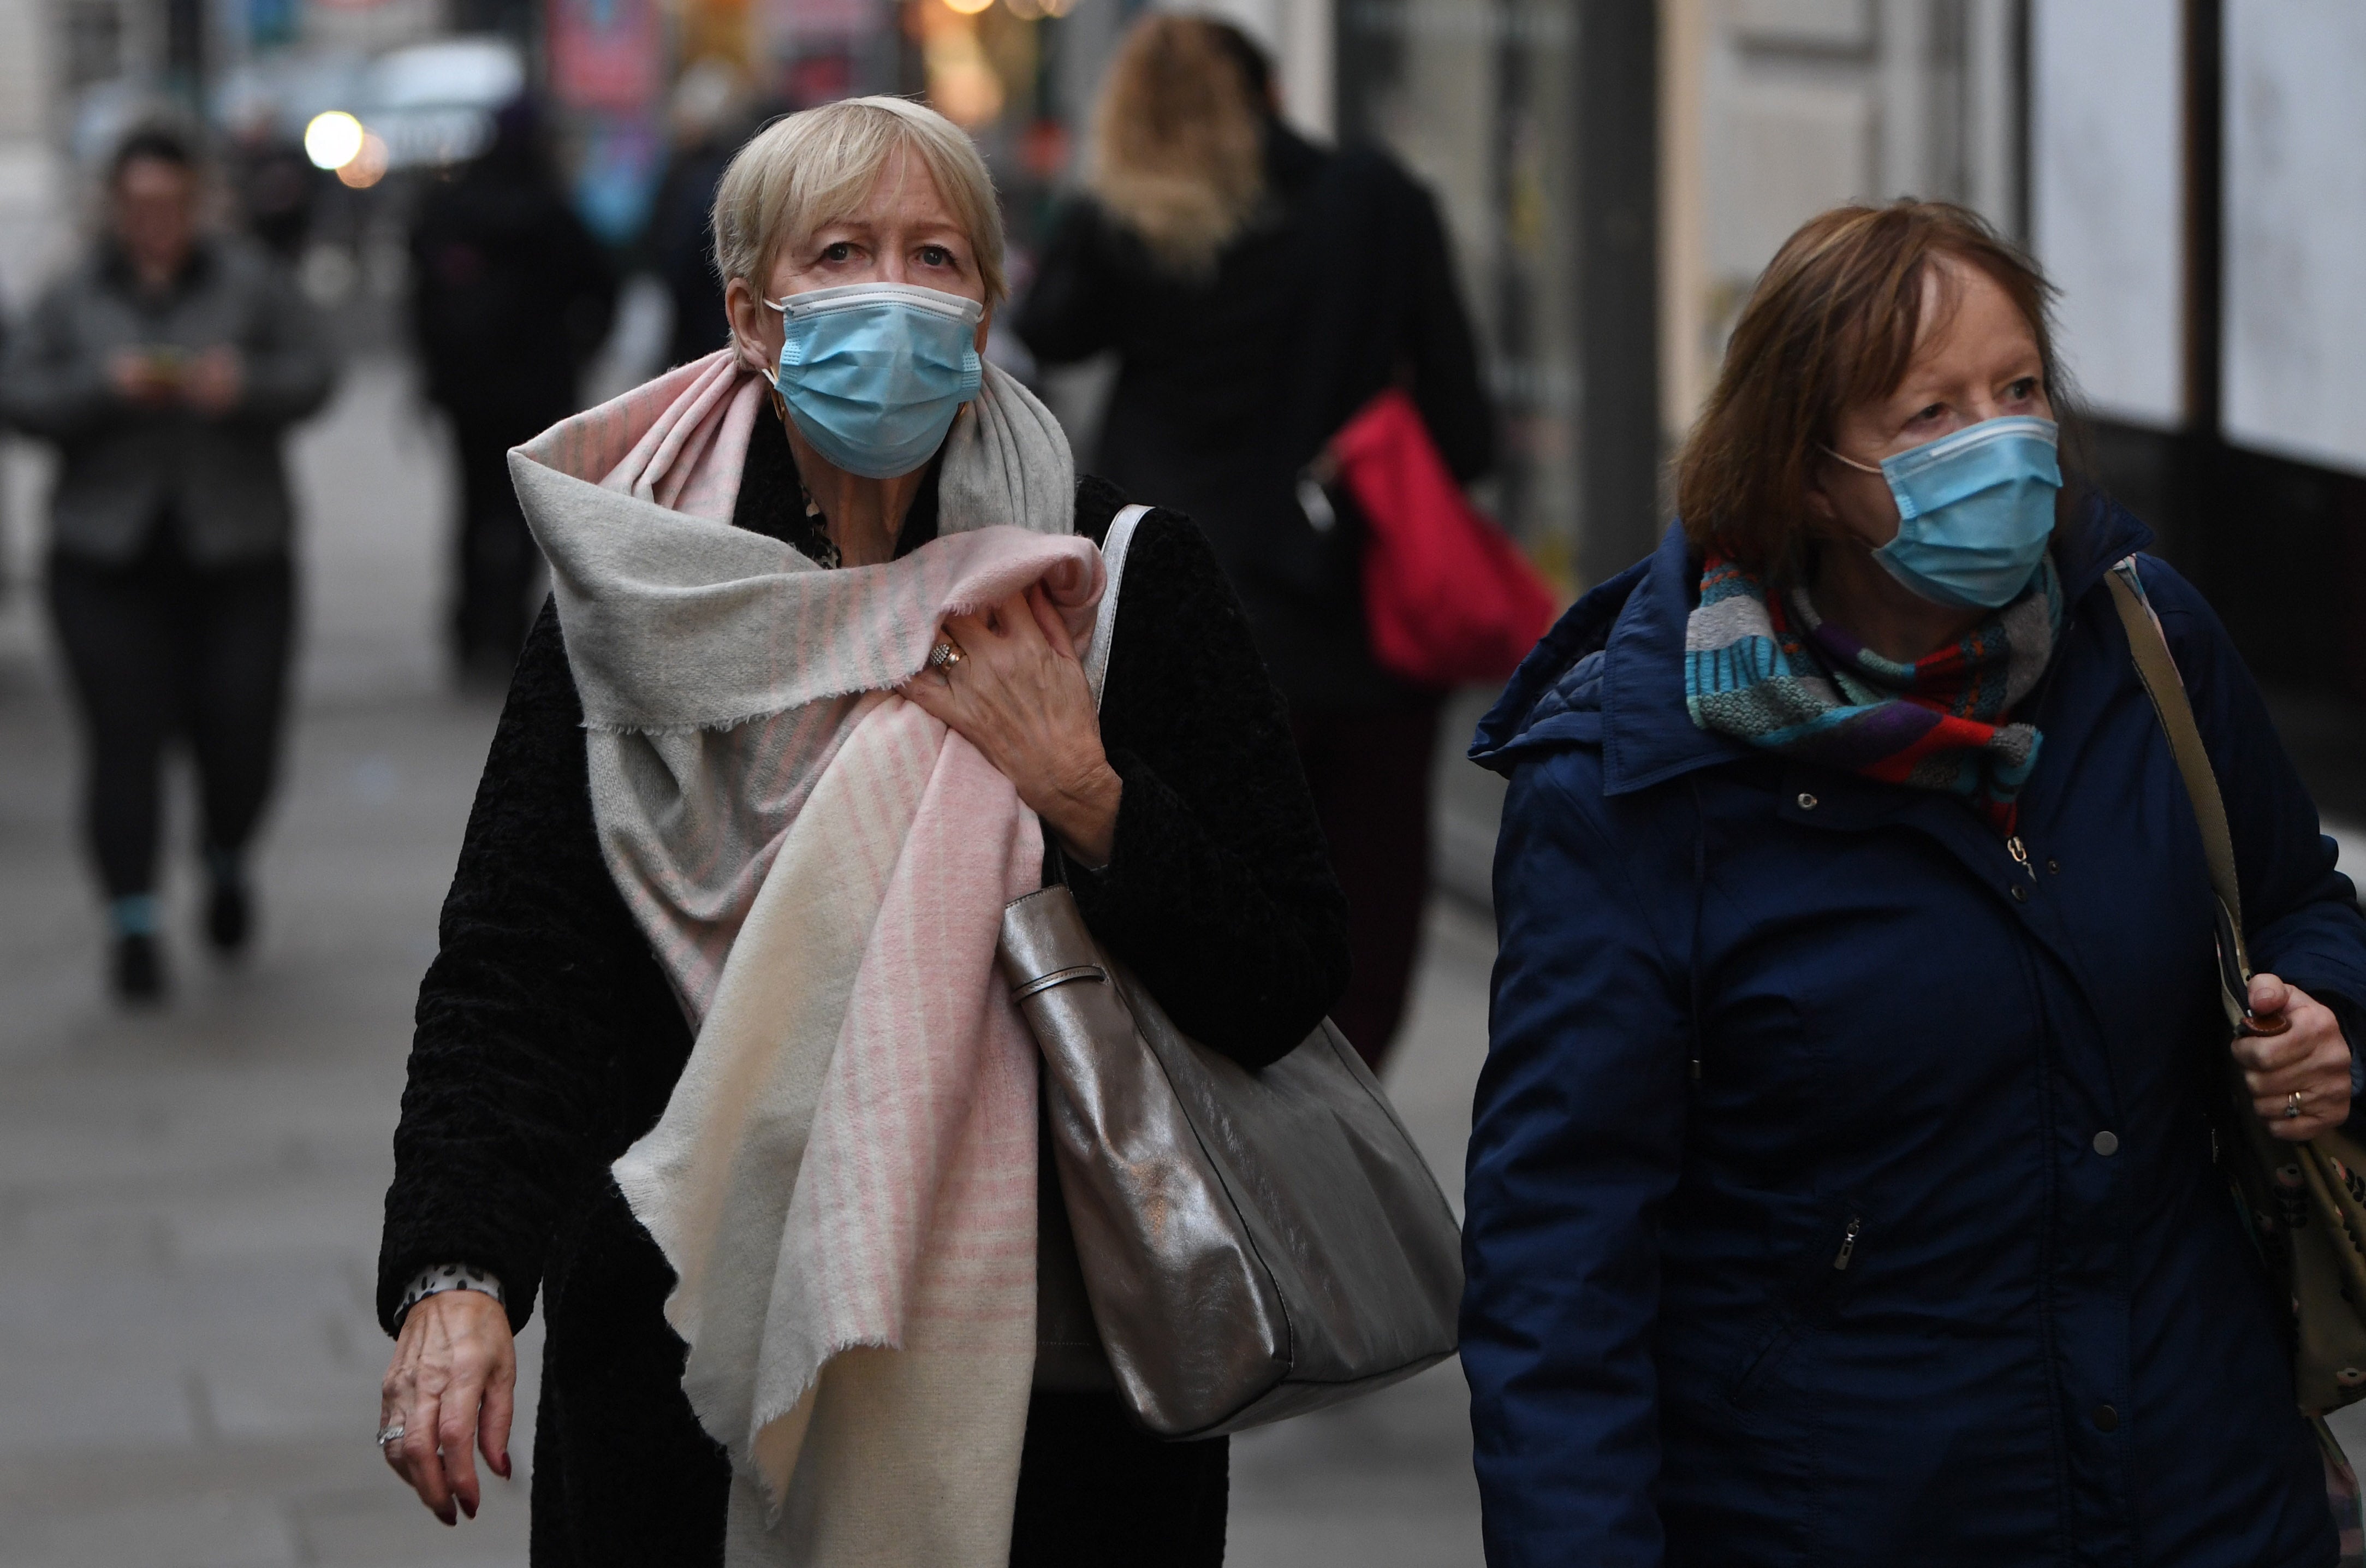 Mask wearers on the streets of London this week